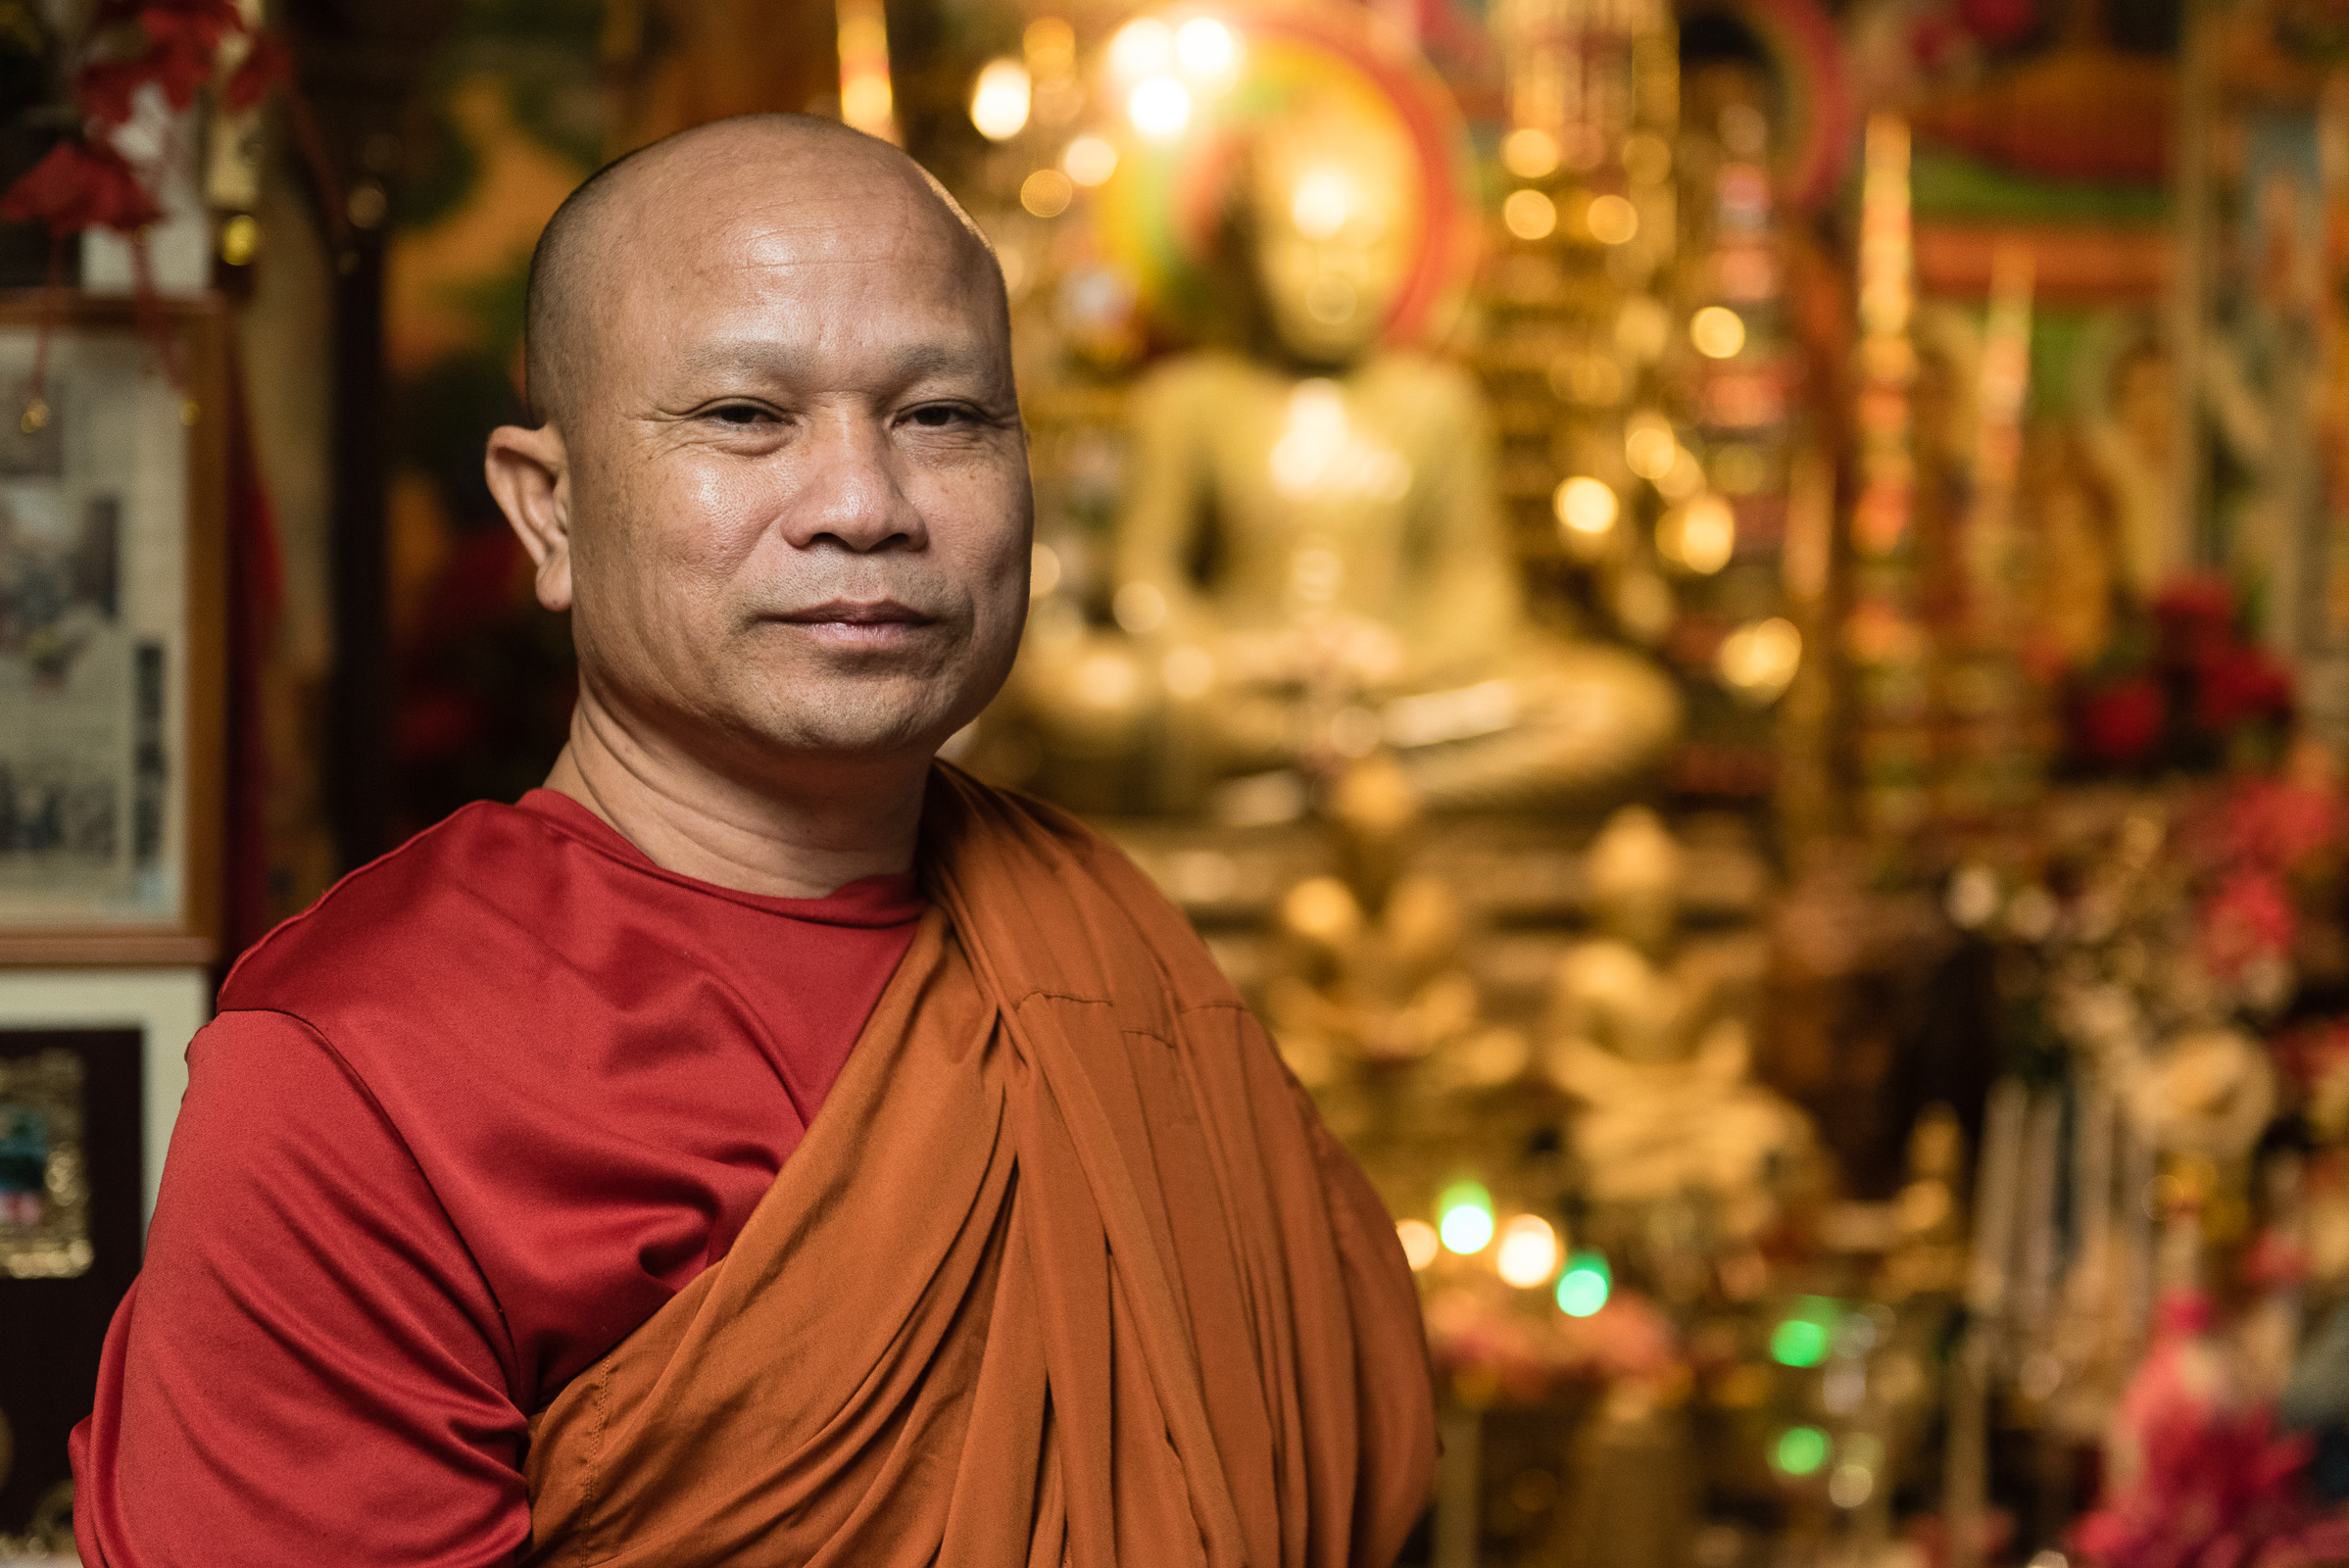   Chamreum Khorl is a refugee from Cambodia who arrived in the United States in 2003. In 2004 the monk helped found a Buddhist temple in Utica, New York and had since been a leader of the Buddhist community in the city.&nbsp; Joseph Ryder   